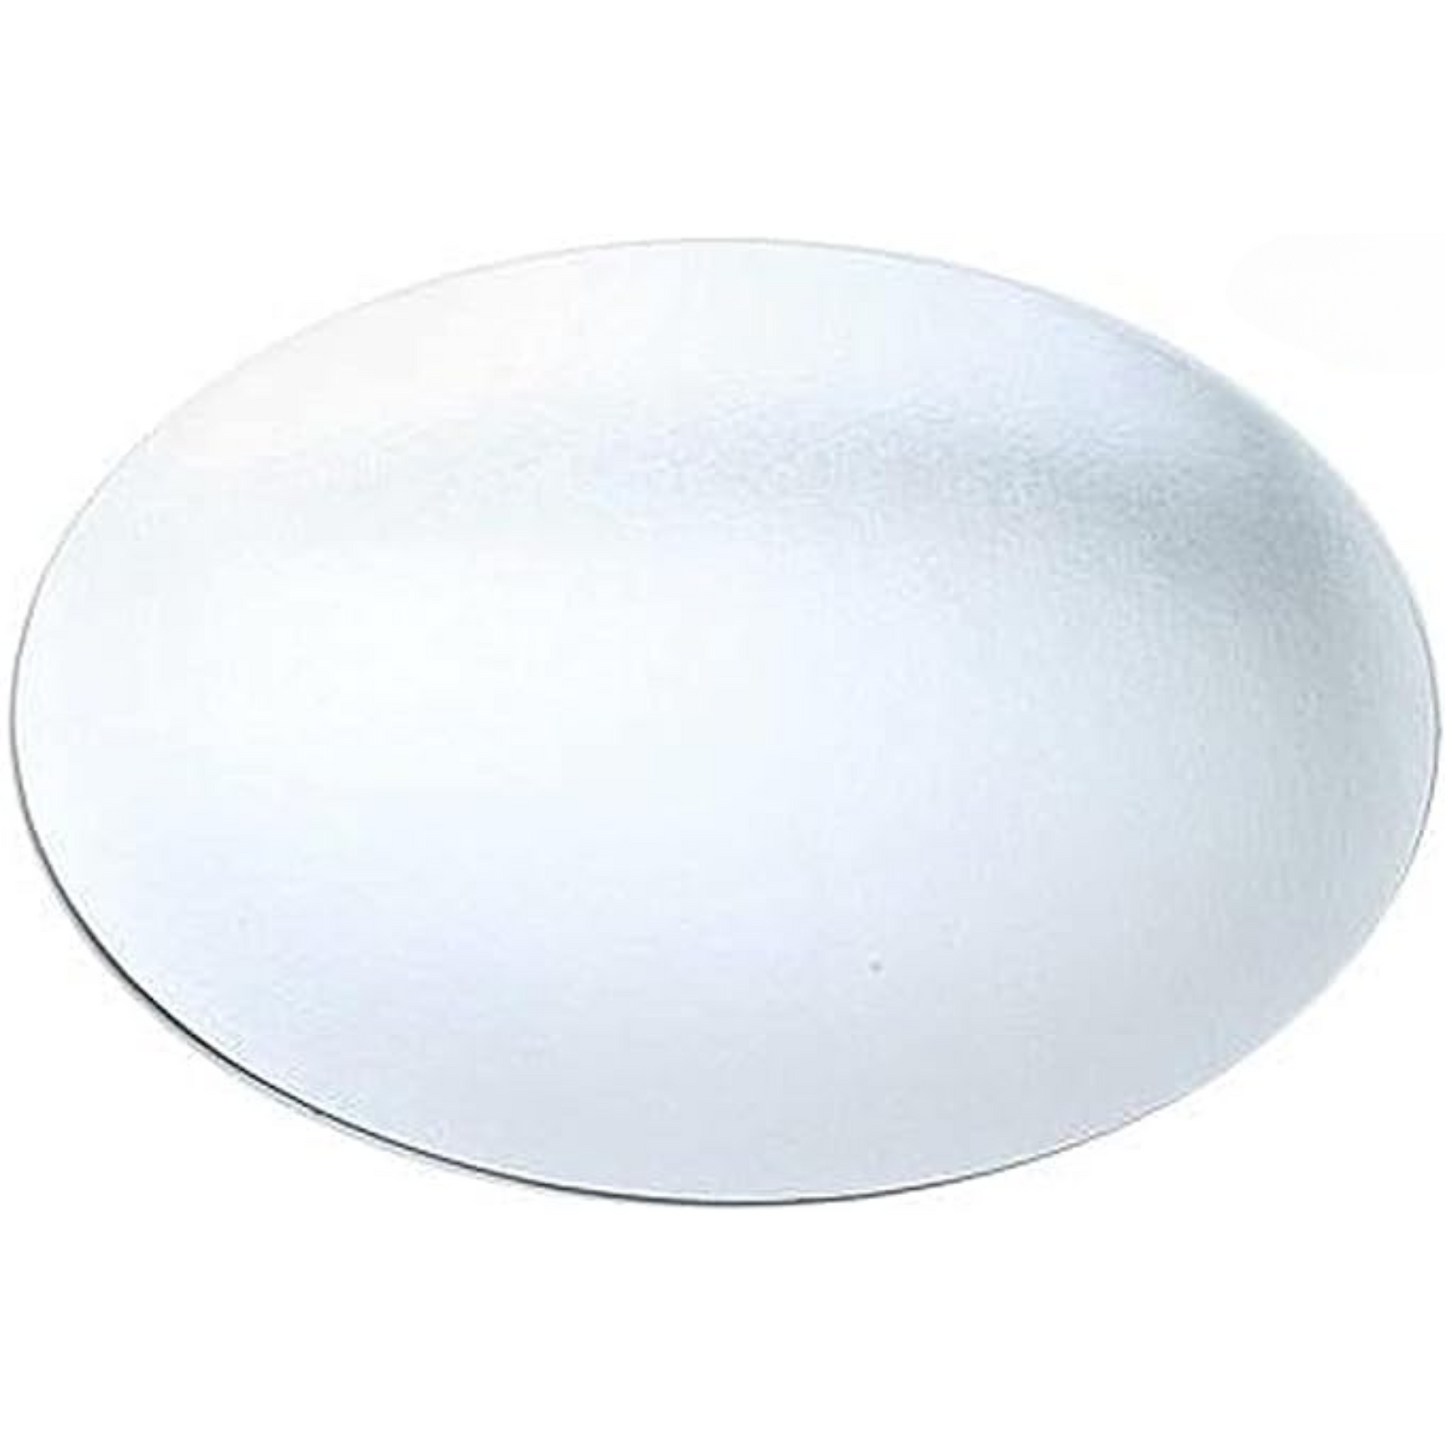 Board Lids for 7" Aluminum Round Pan